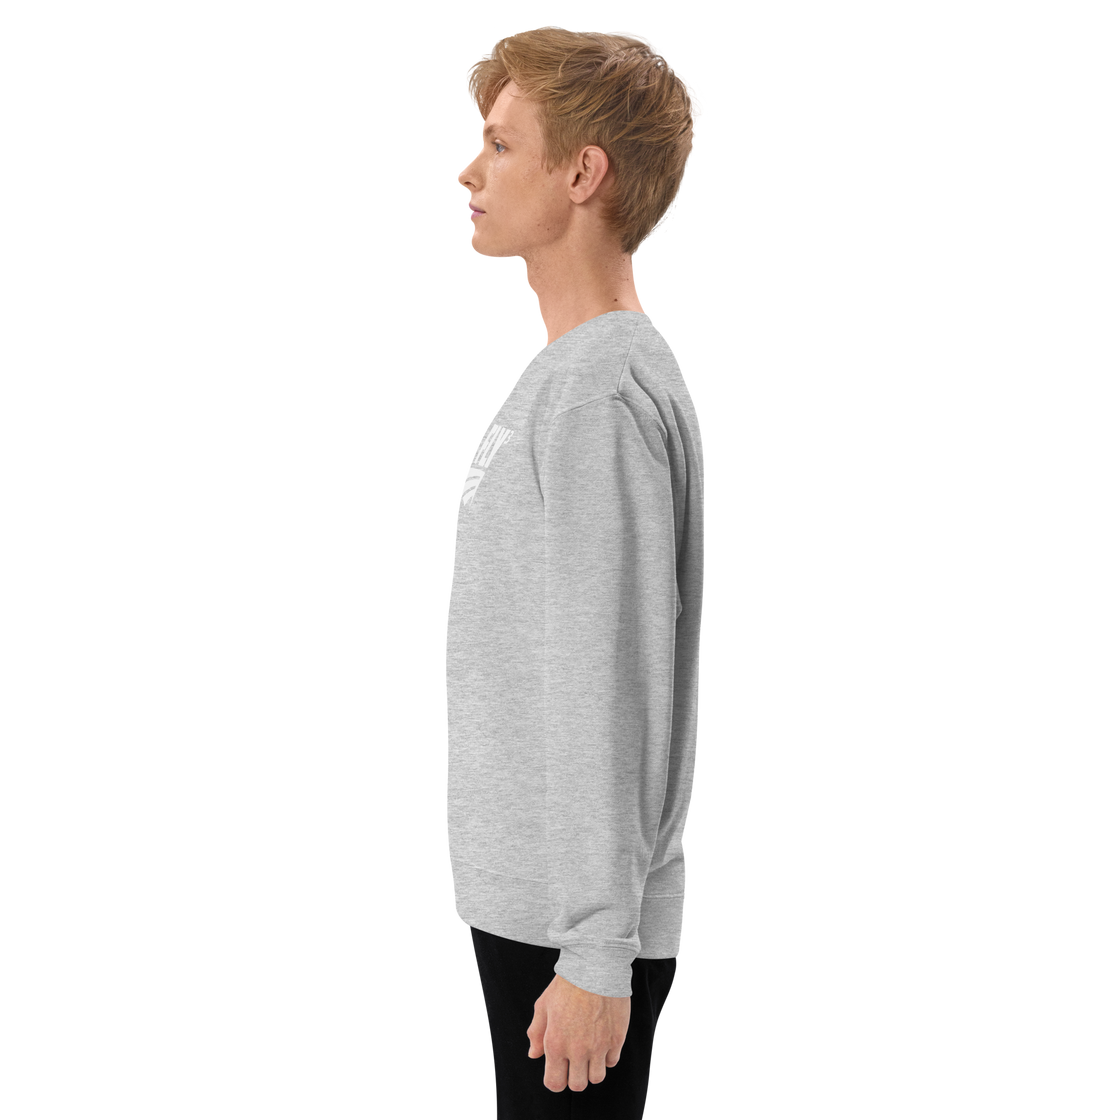 FLY³ french terry sweatshirt | Flycube